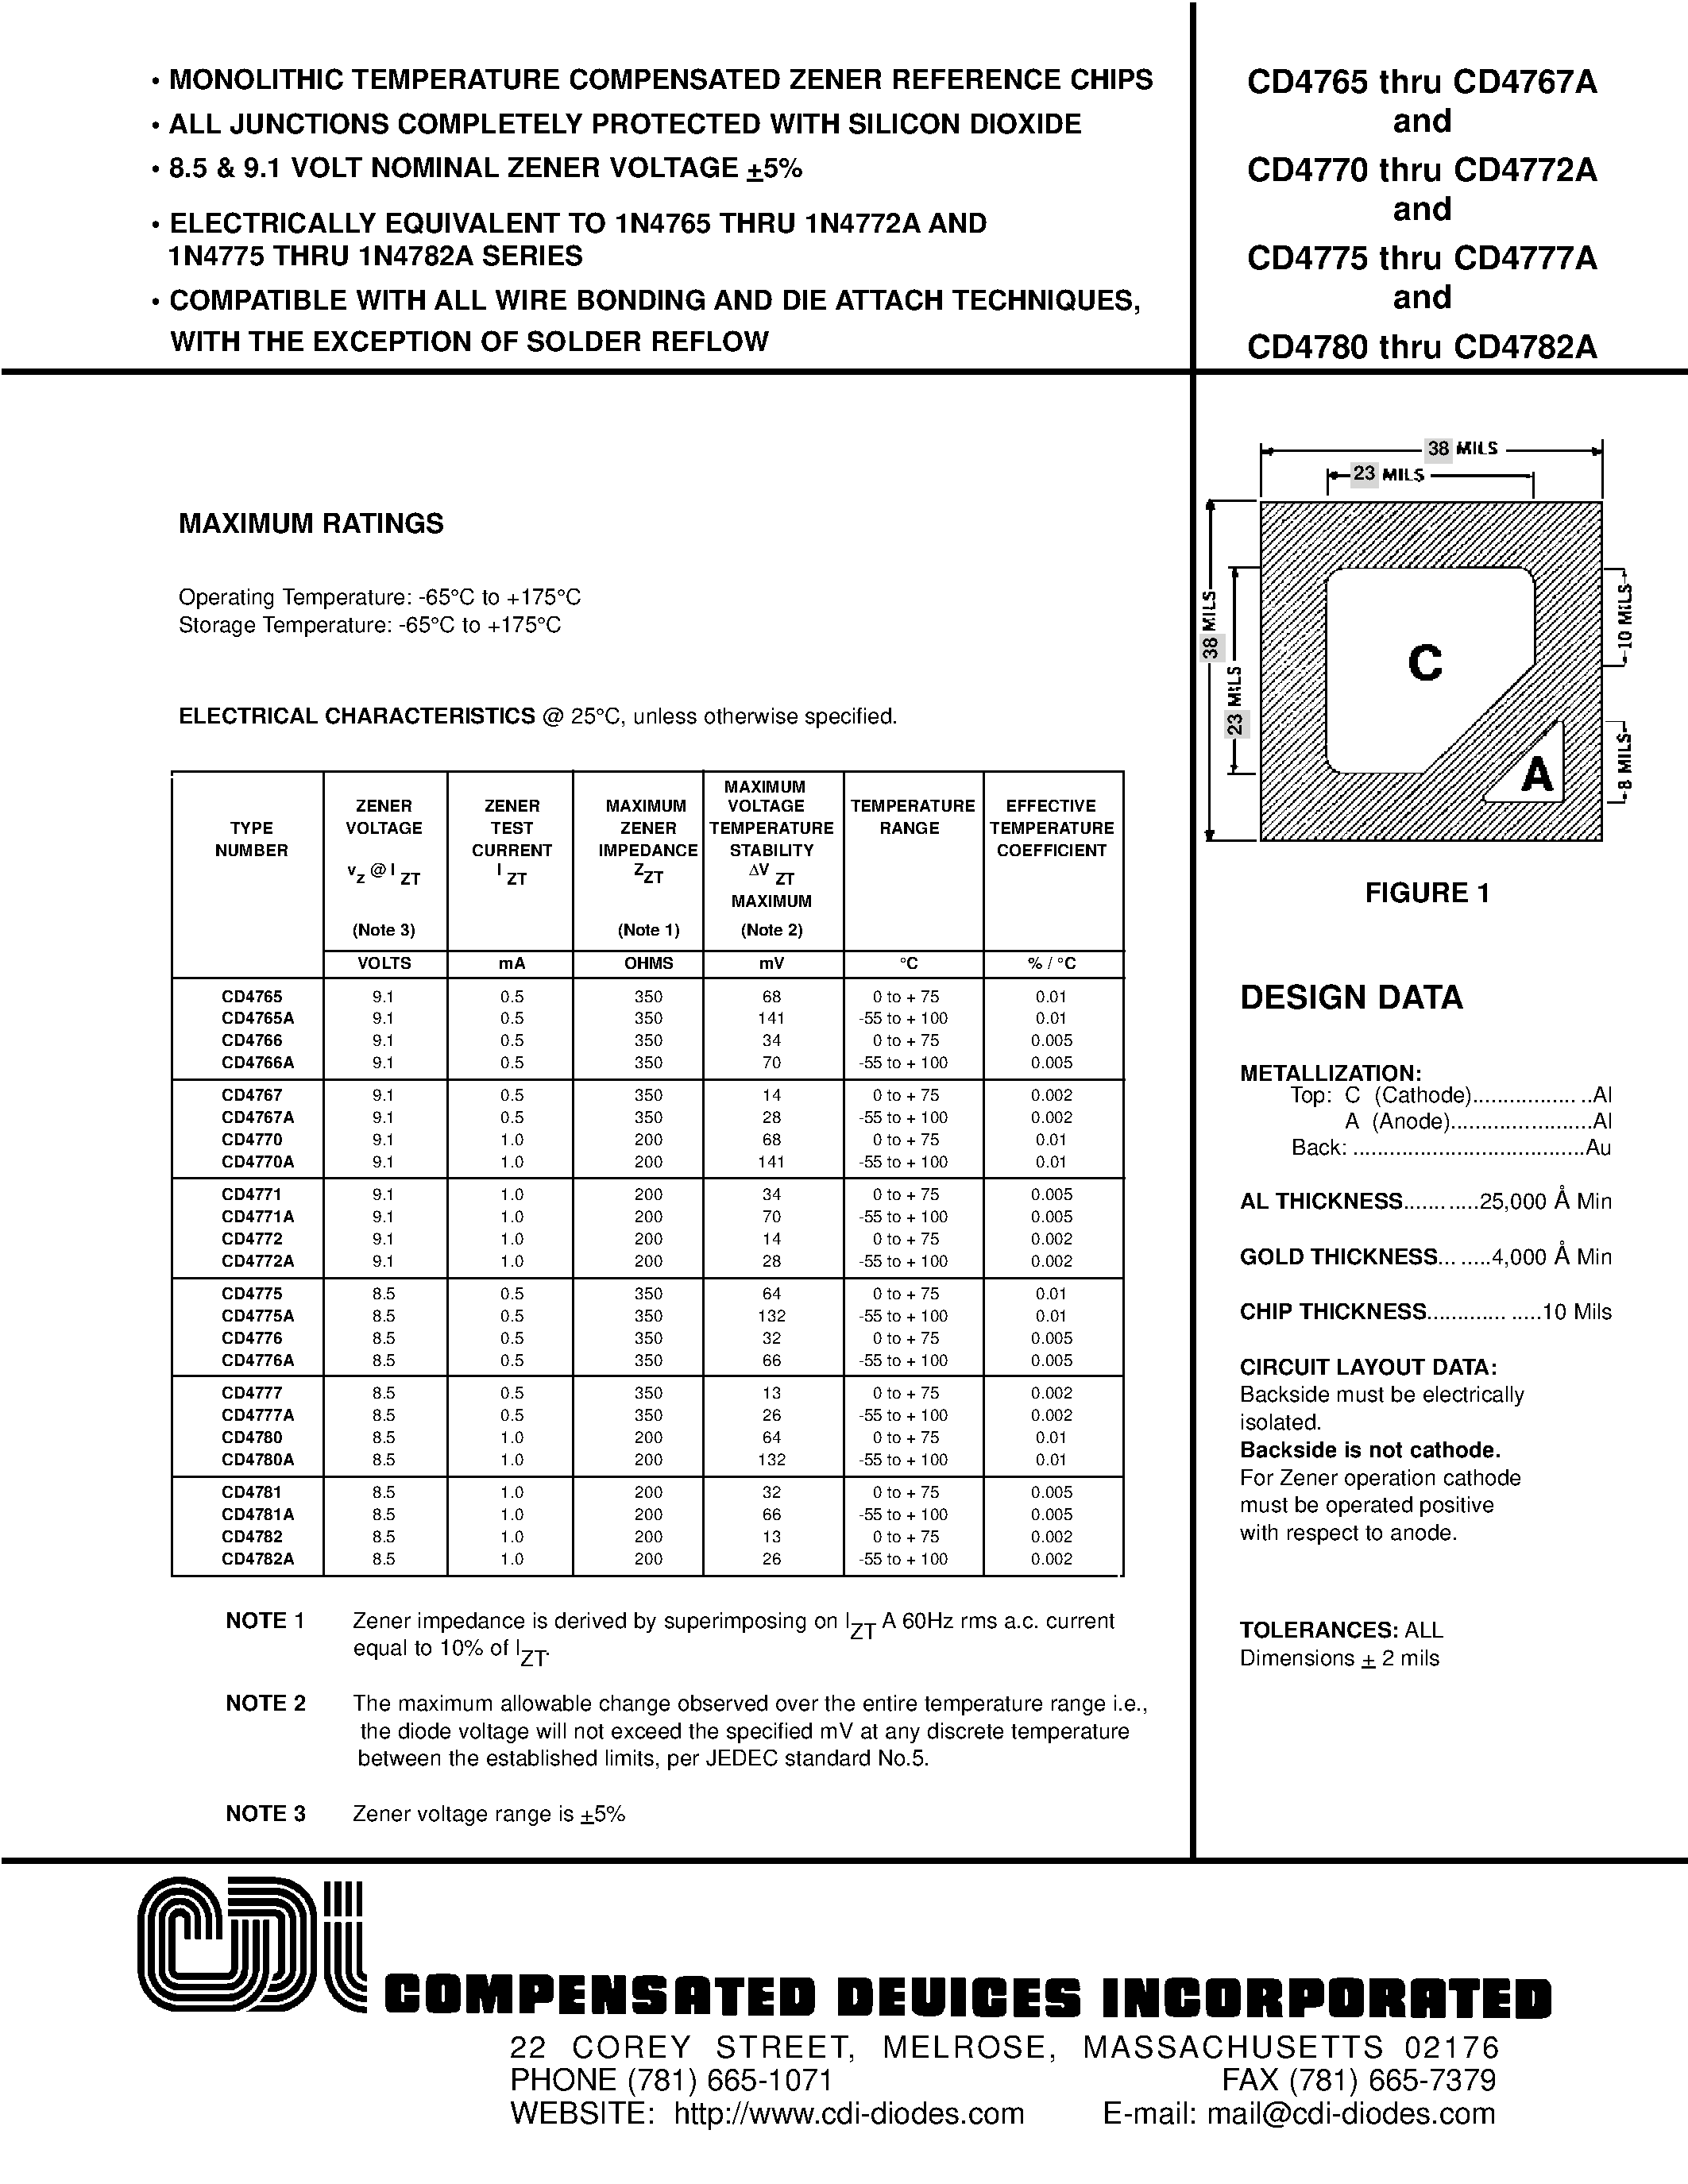 Datasheet CD4776A - MONOLITHIC TEMPERATURE COMPENSATED ZENER REFERENCE CHIPS page 1